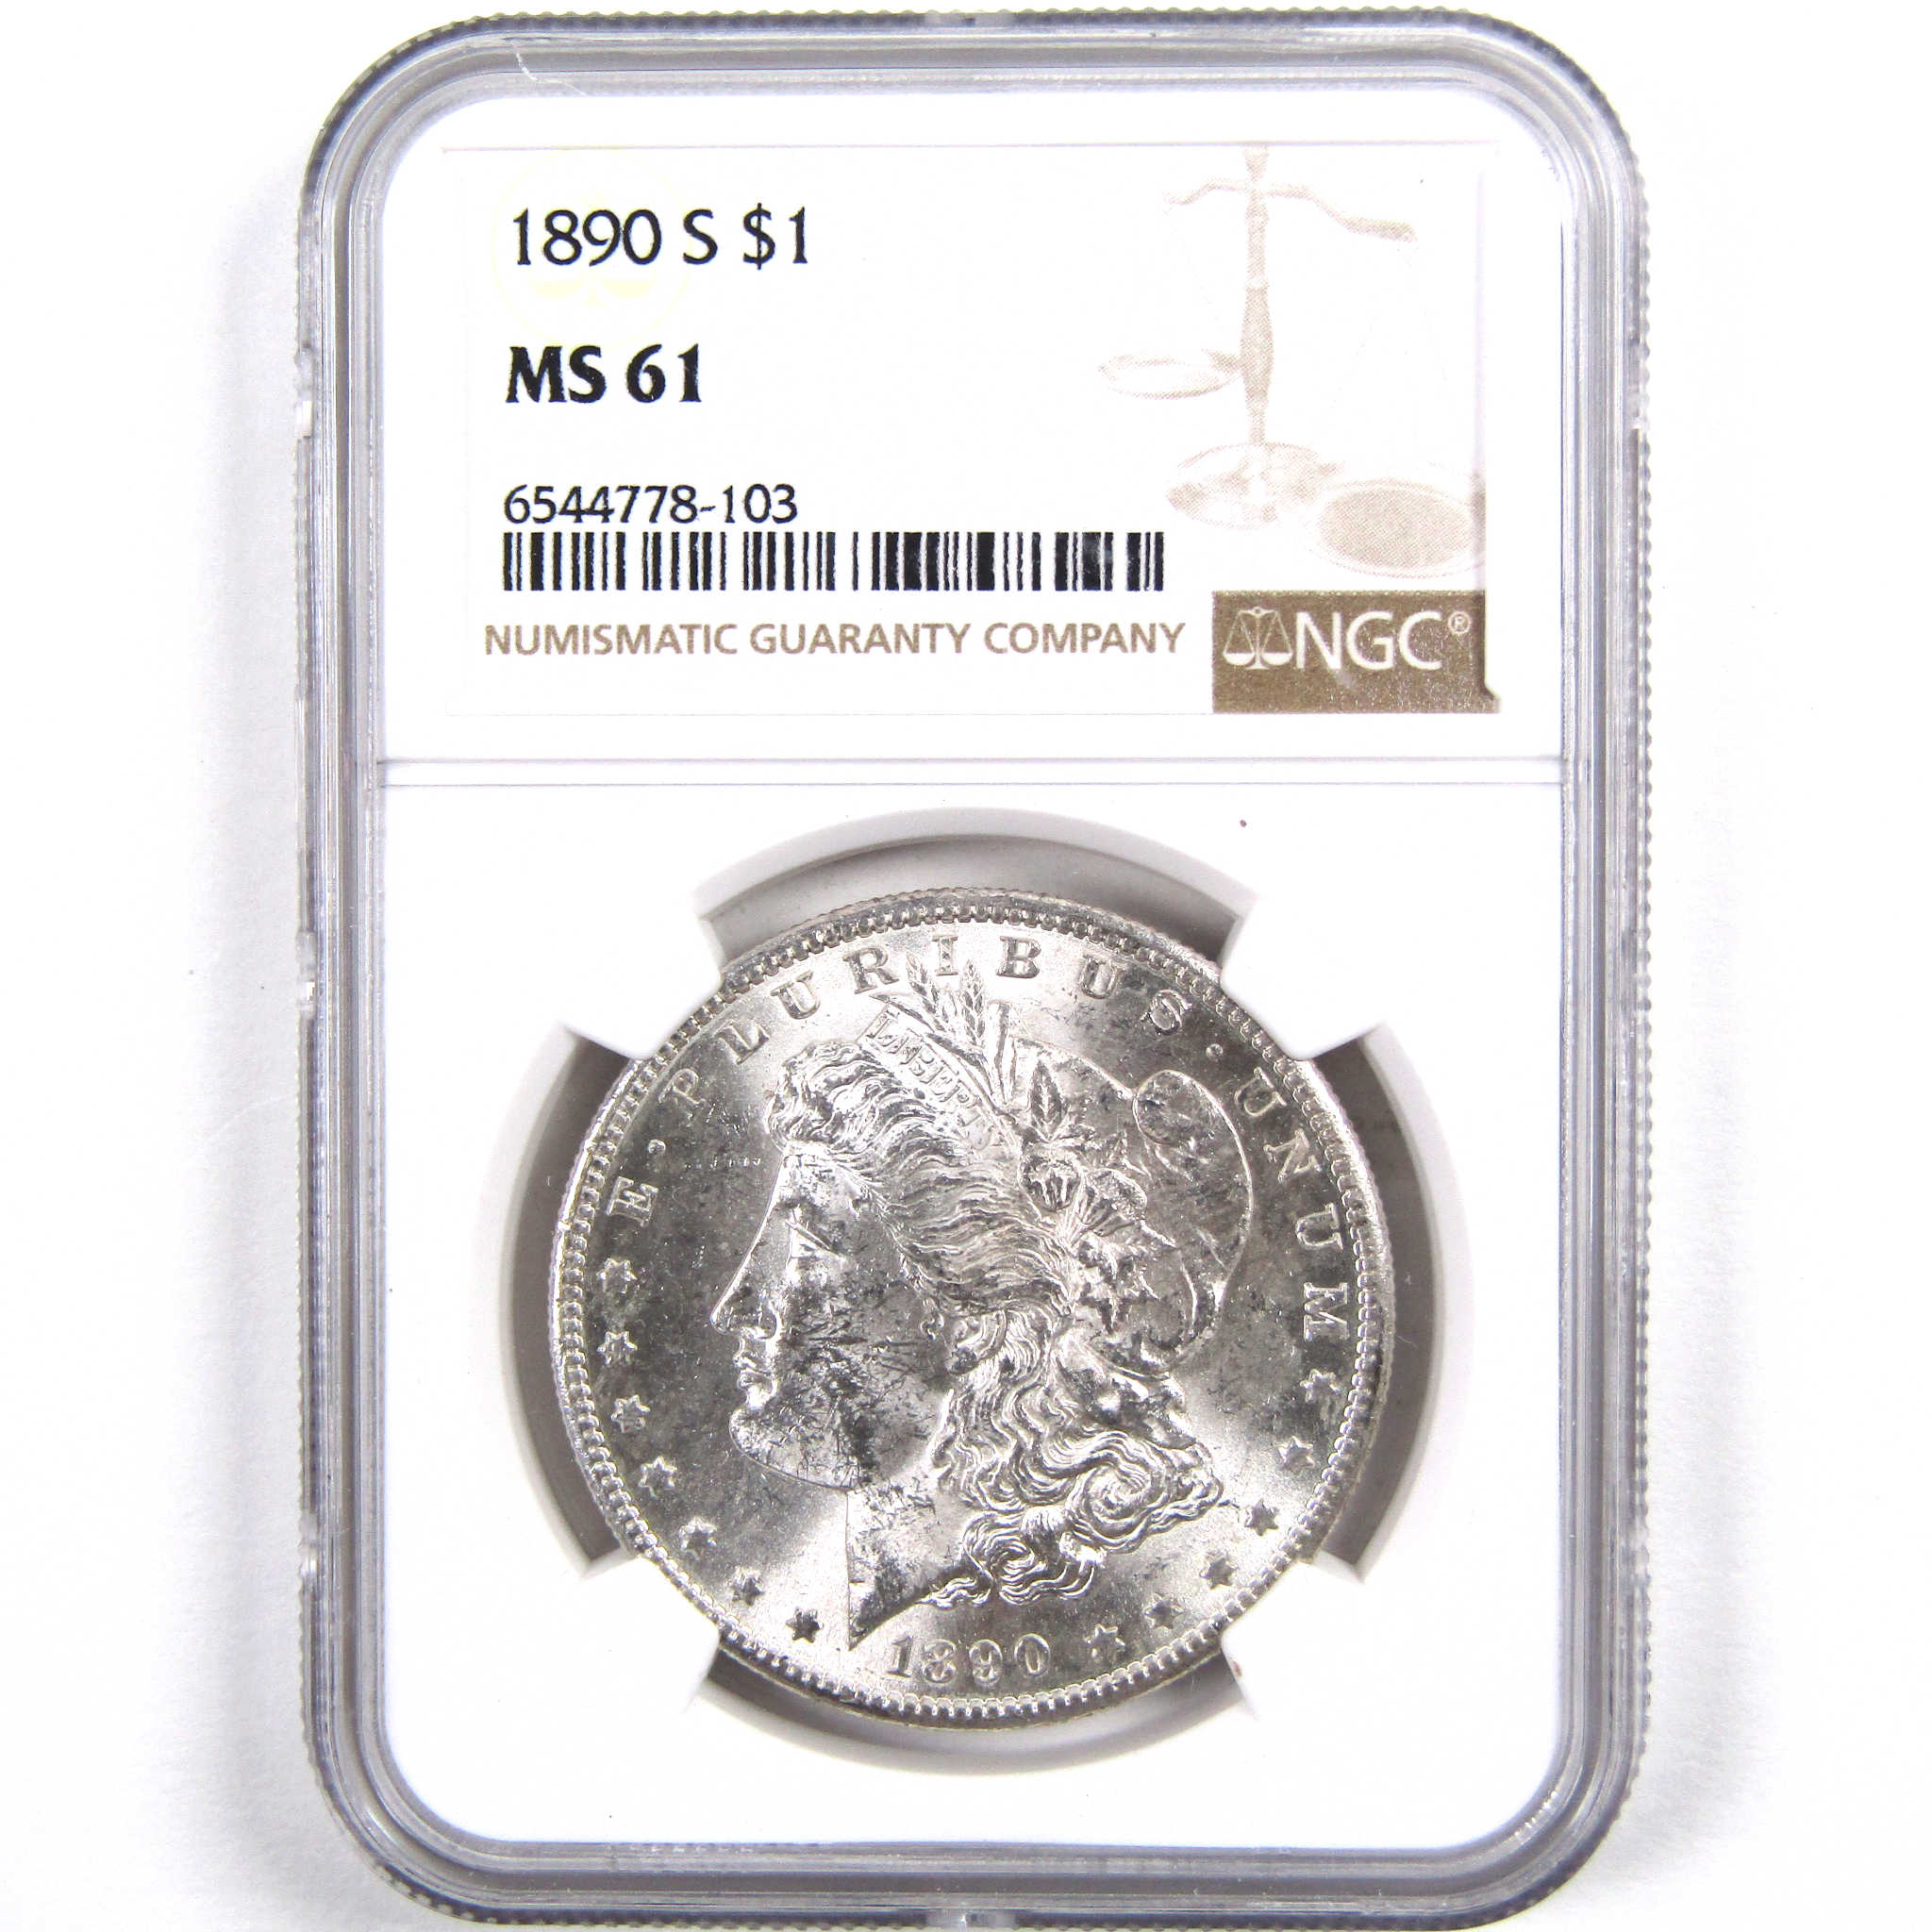 1890 S Morgan Dollar MS 61 NGC 90% Silver Uncirculated SKU:I3102 - Morgan coin - Morgan silver dollar - Morgan silver dollar for sale - Profile Coins &amp; Collectibles